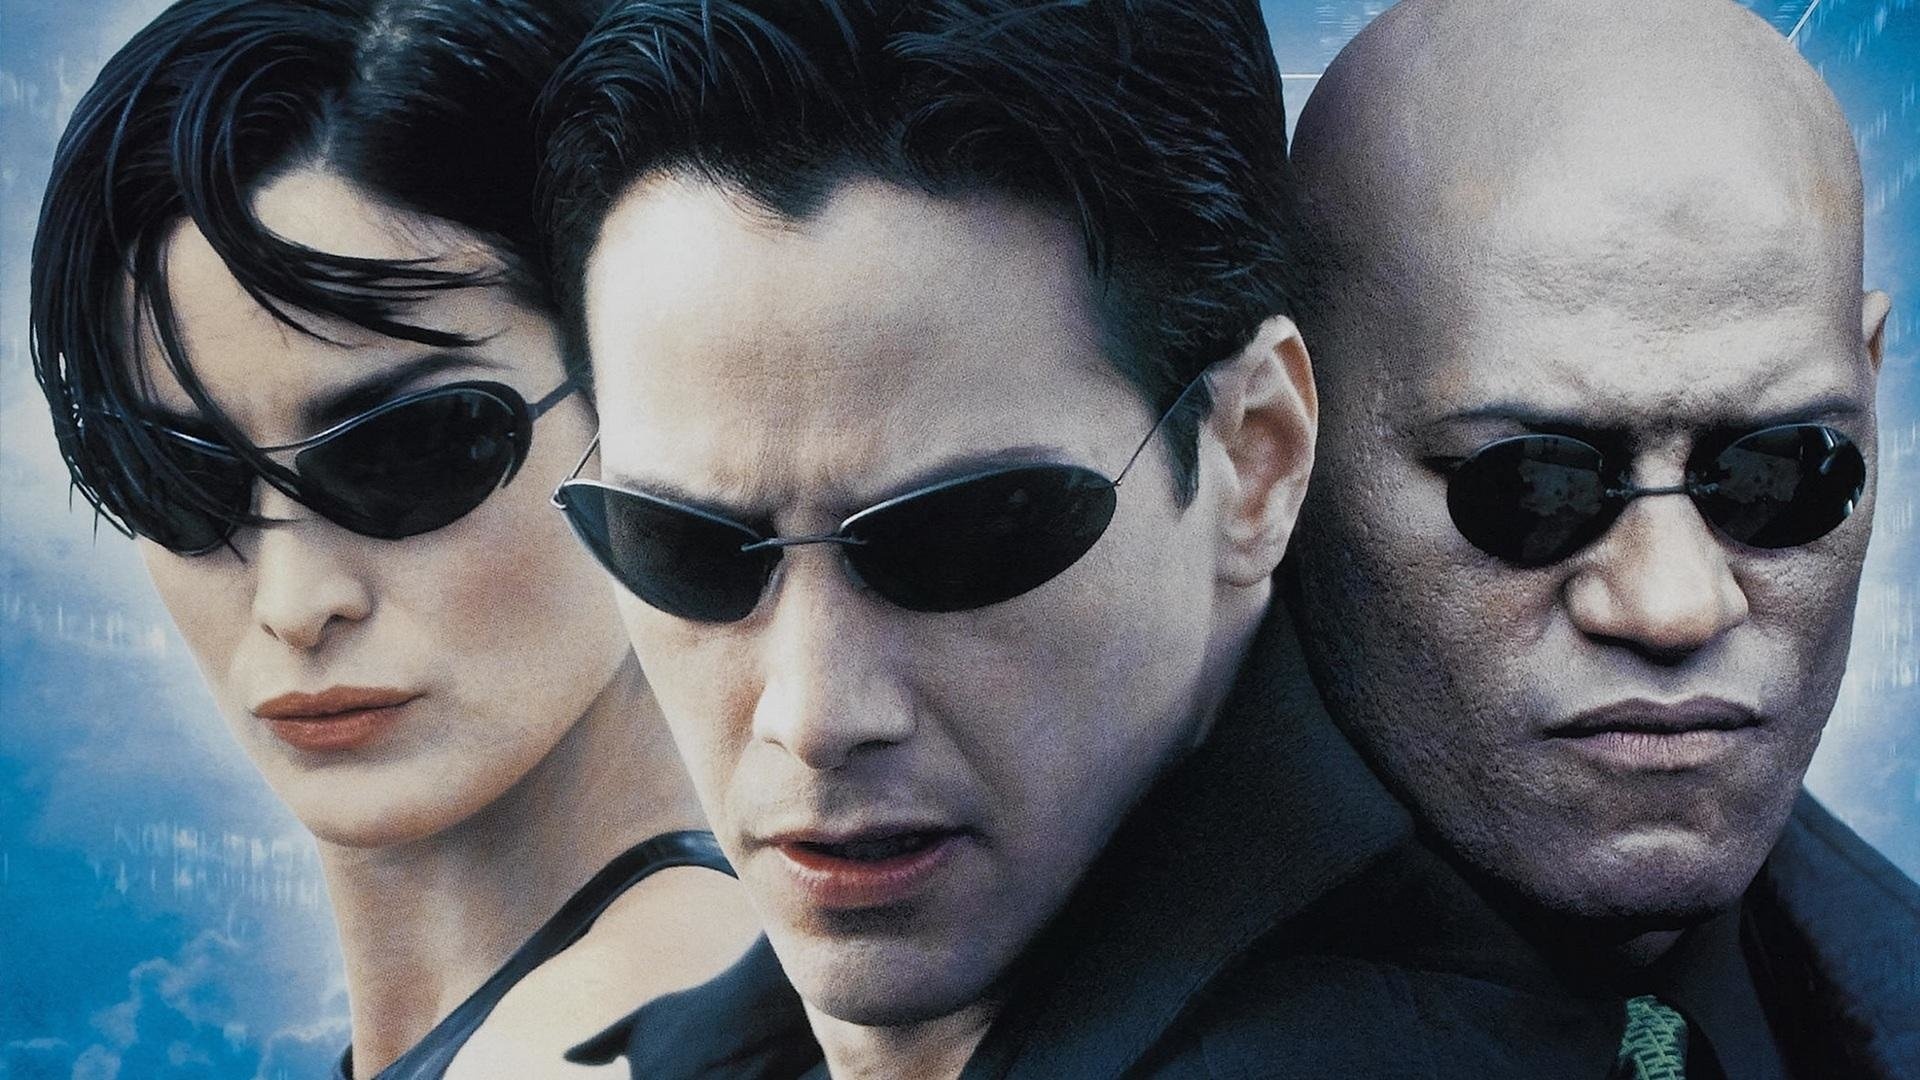 HD wallpapers, Background images, The Matrix, Neo, 1920x1080 Full HD Desktop